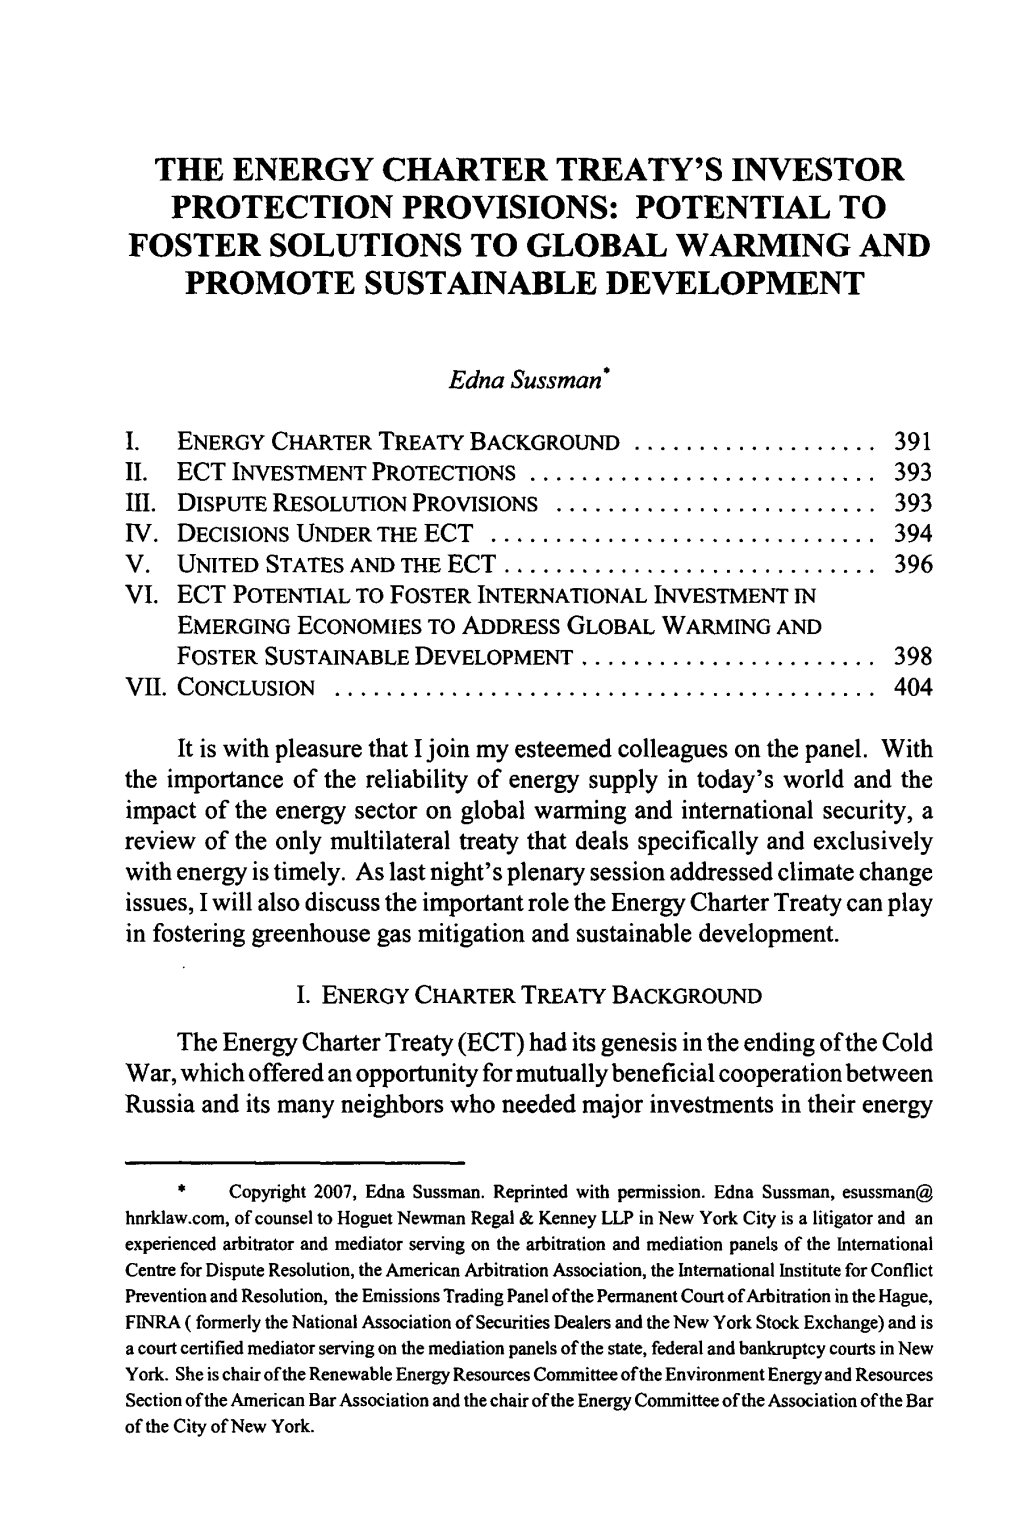 The Energy Charter Treaty's Investor Protection Provisions: Potential to Foster Solutions to Global Warming and Promote Sustainable Development